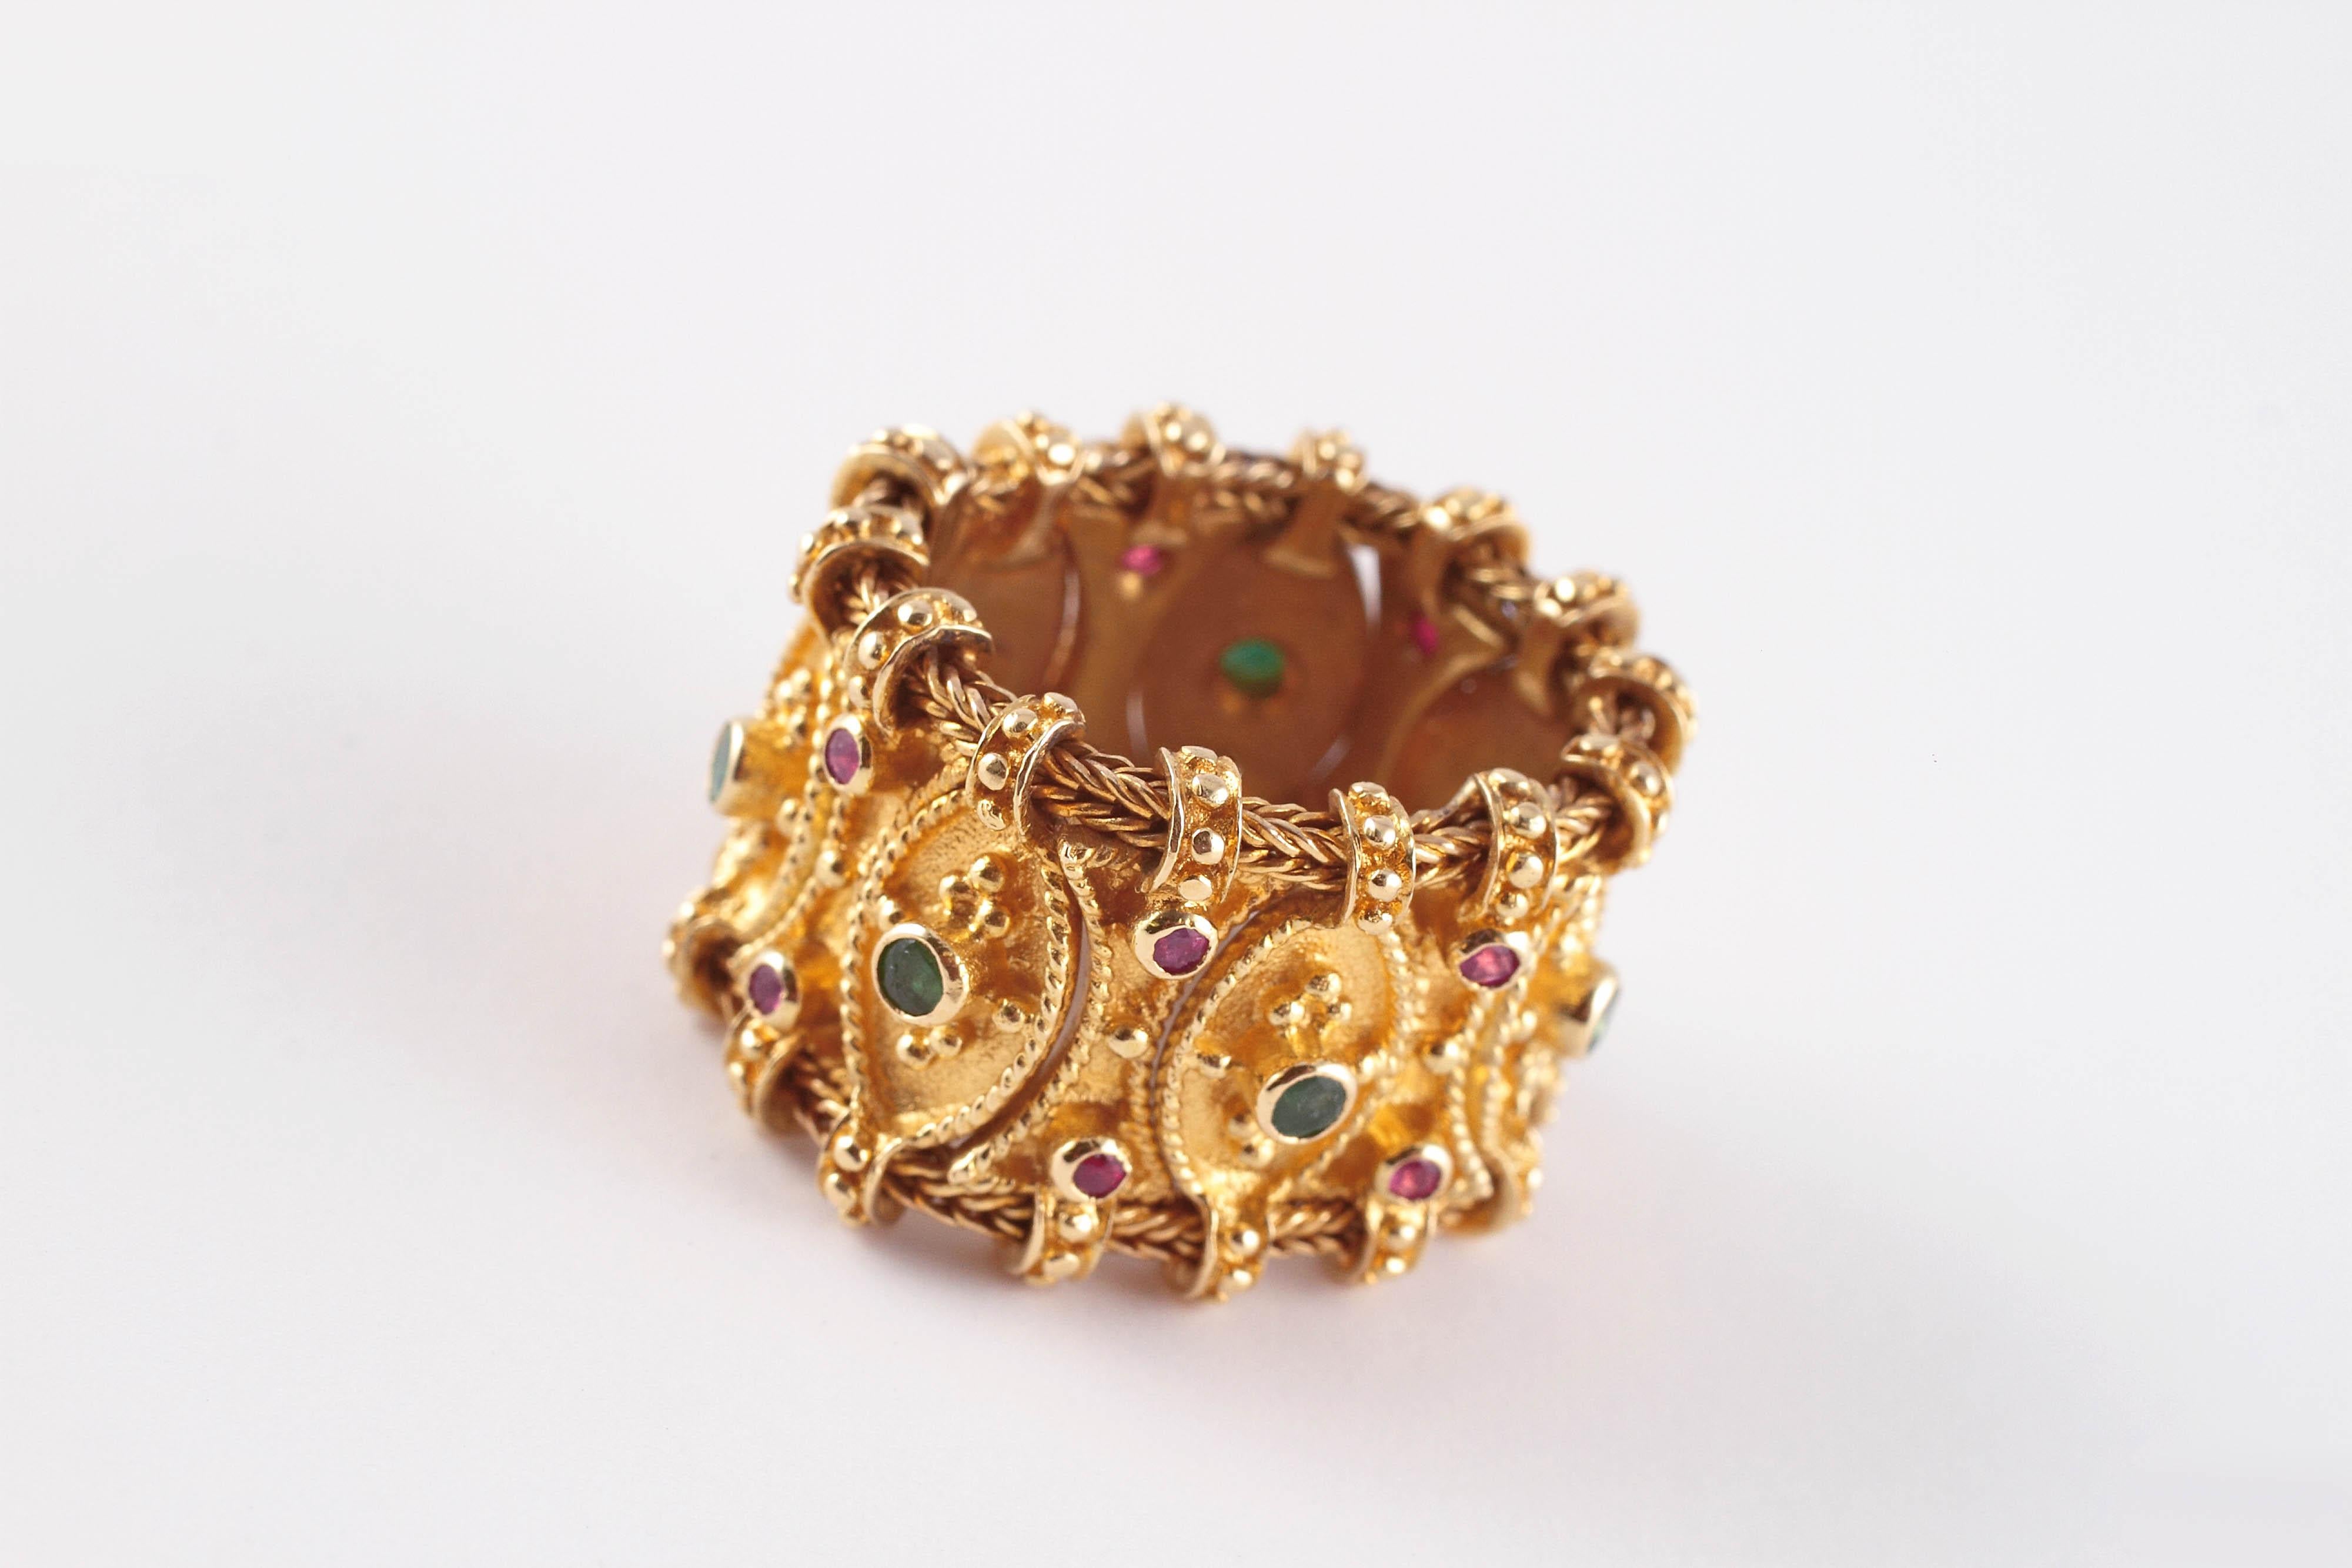 This is a stunner!  Composed of 18 karat yellow gold, with rubies and emeralds, comfortable and unusual!